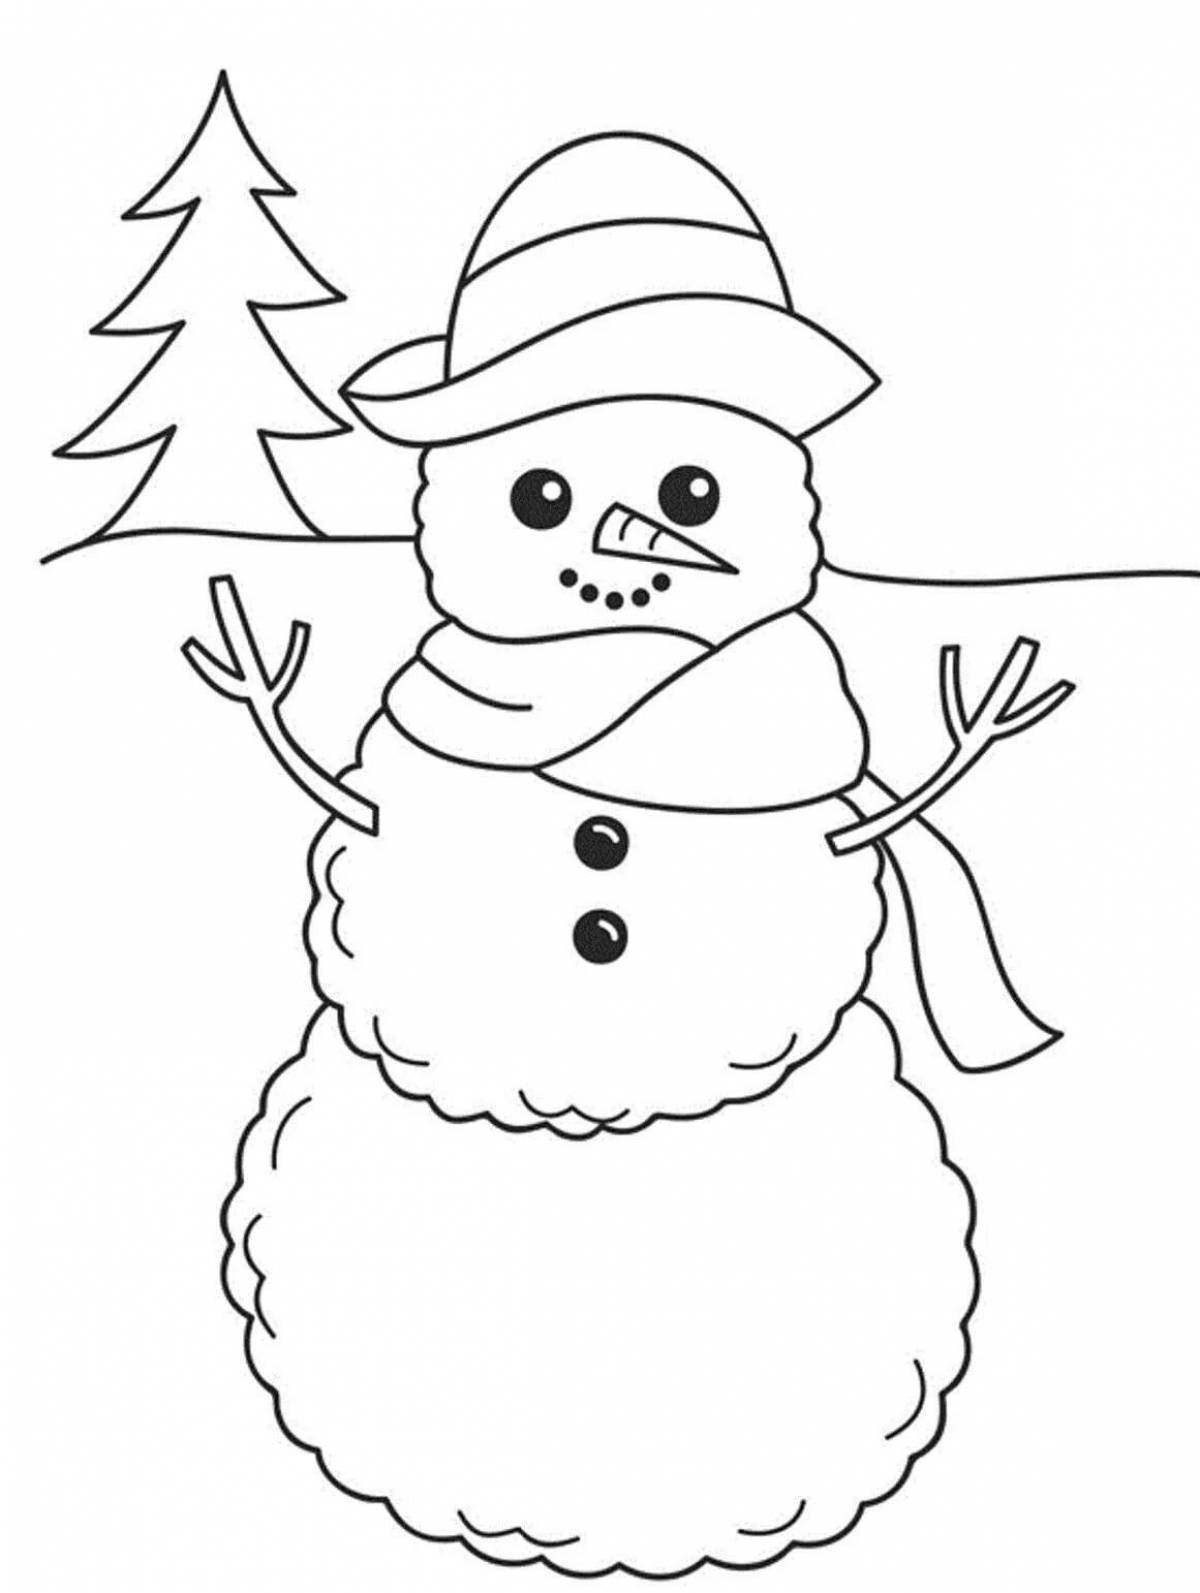 Giggly snowman coloring book